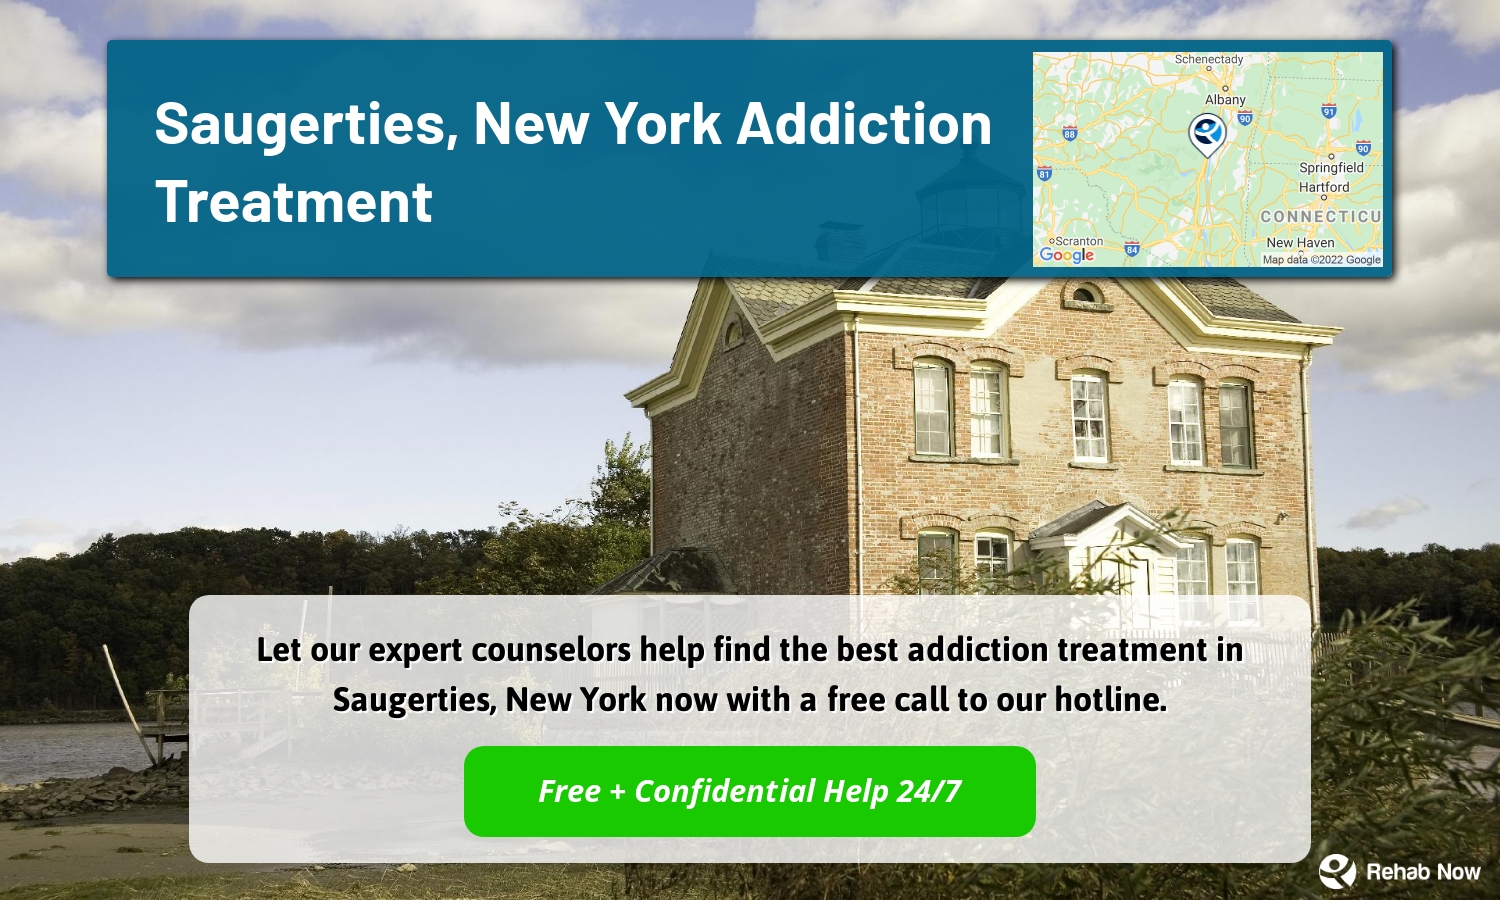 Let our expert counselors help find the best addiction treatment in Saugerties, New York now with a free call to our hotline.